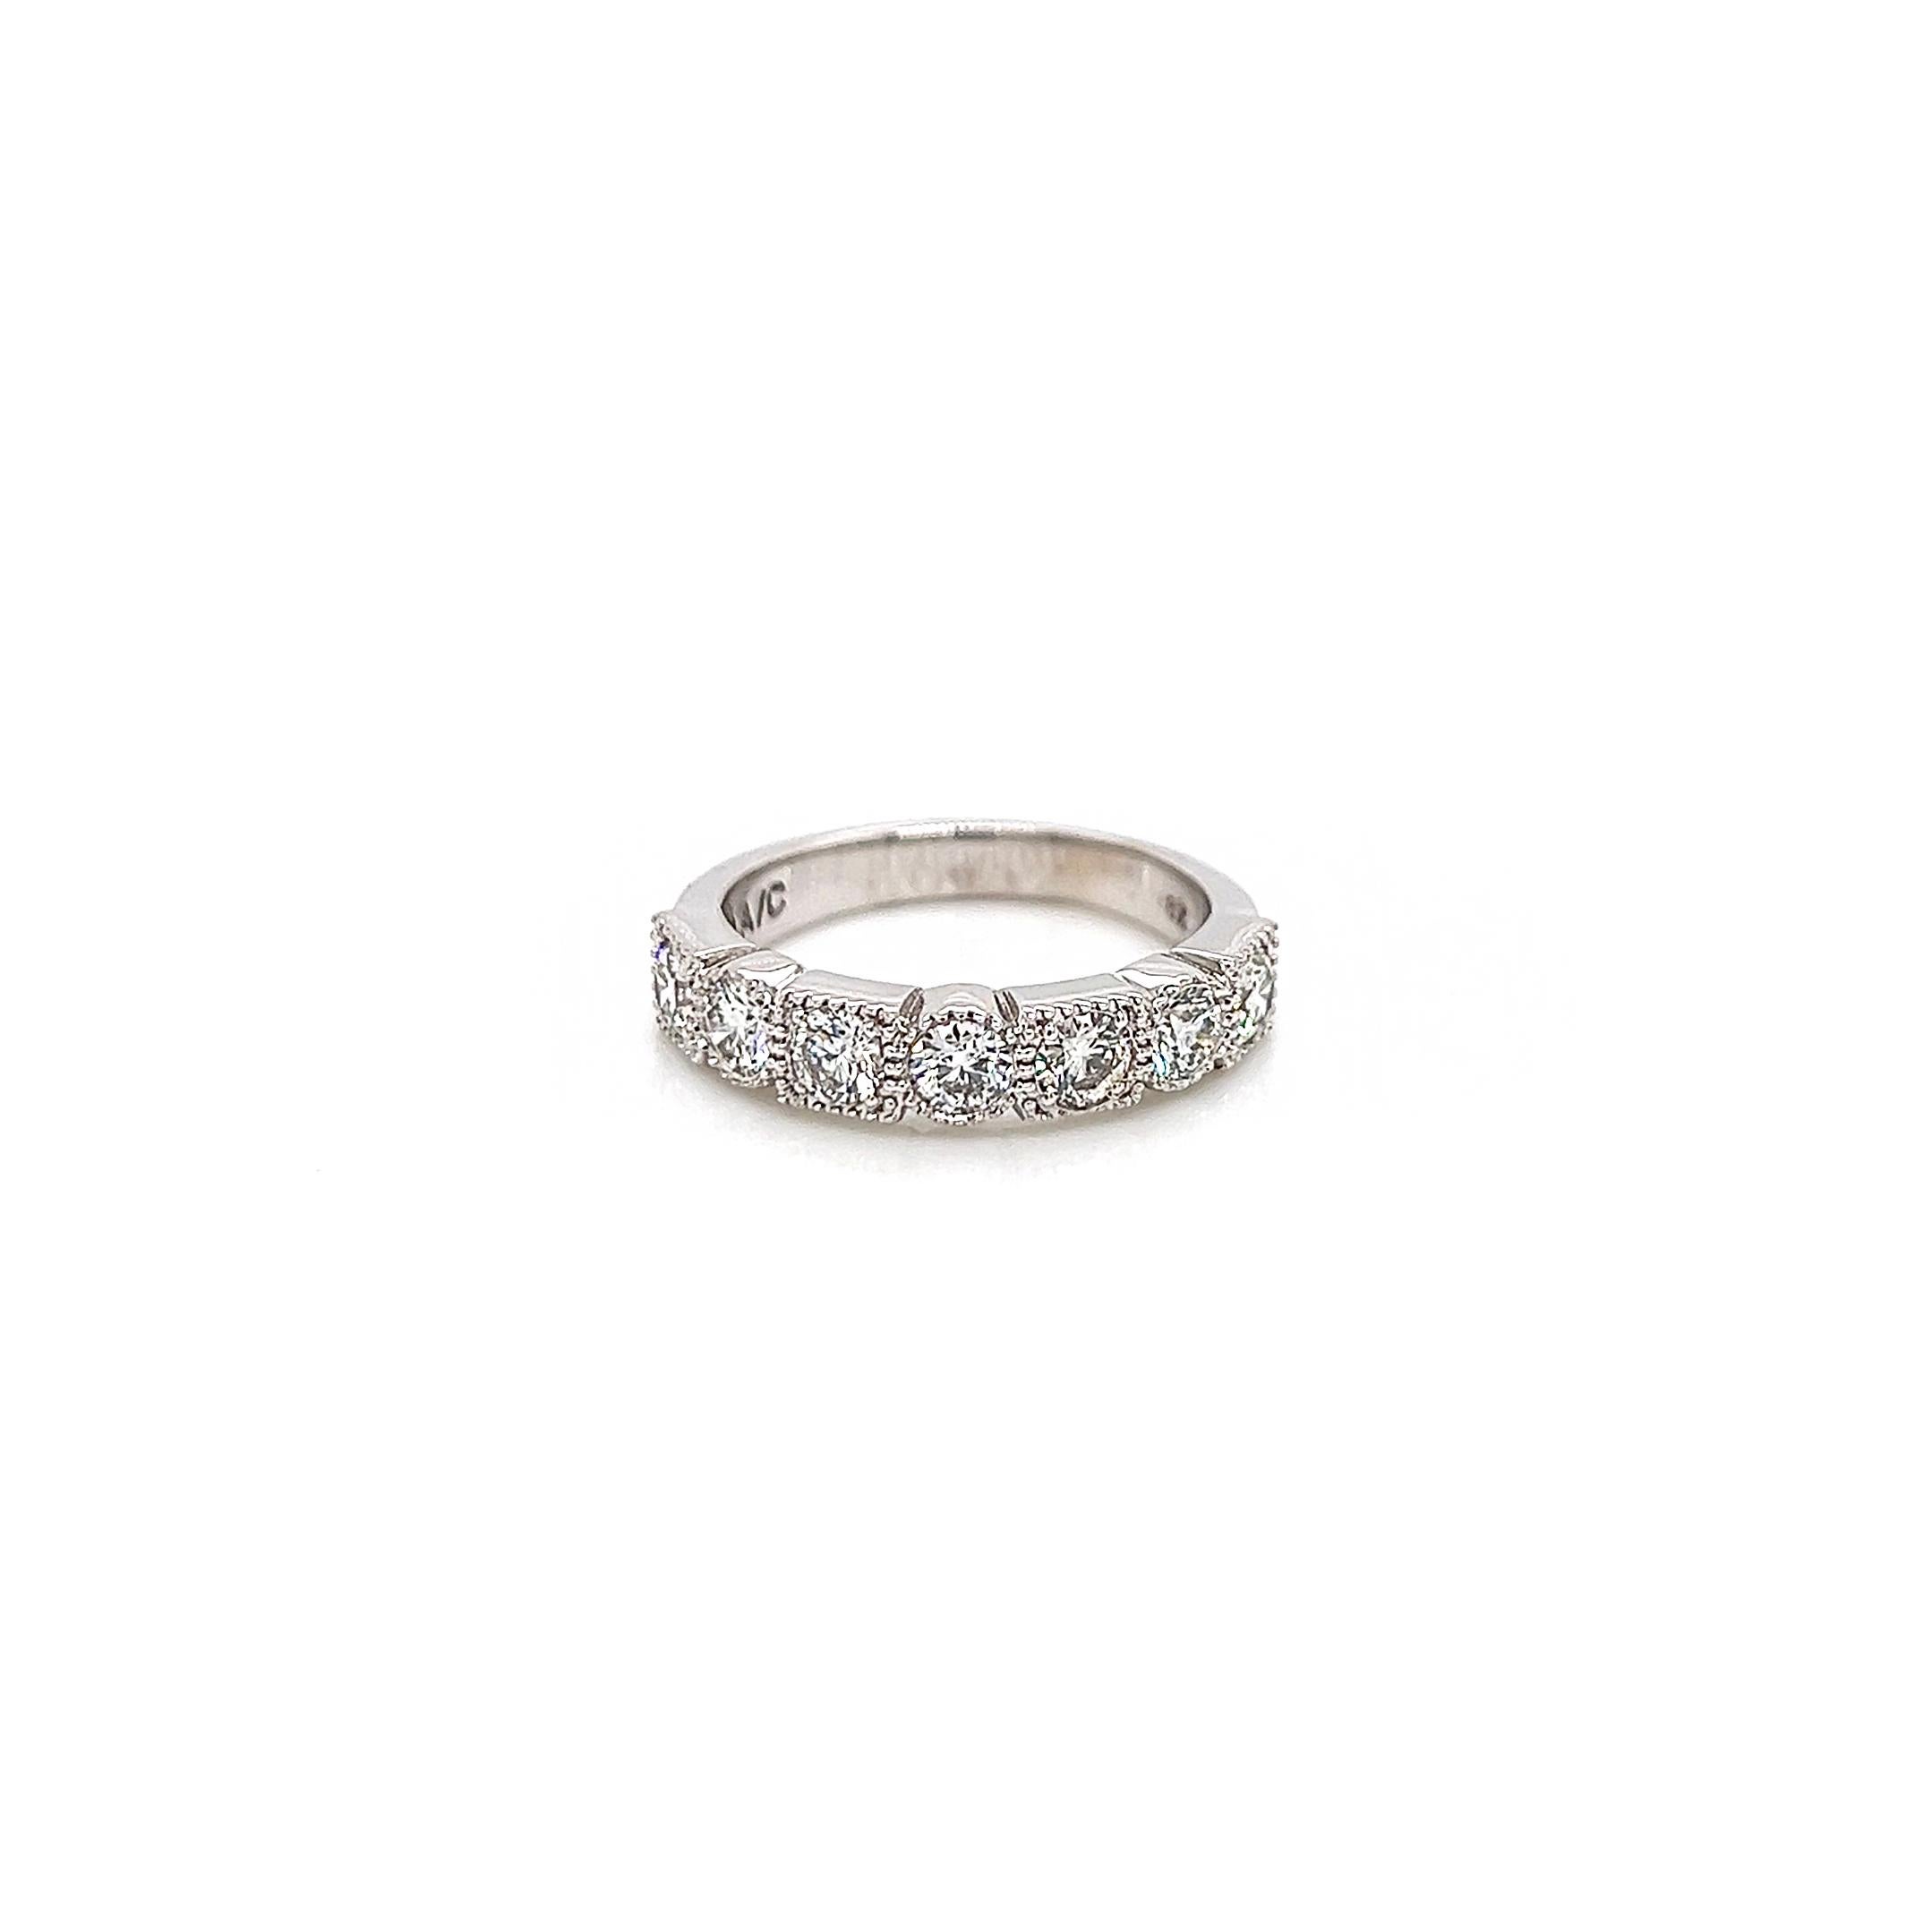 1.10 Carat Bezel Set Ladies Diamond Eternity Band With Milgrain

-Metal Type: 18K White Gold
-1.10Carat Round Natural Diamonds
-G-H Color
-VS Clarity
-Antique Inspired Collection, stackable Diamond Ring
-Size 7.0

Resize is available upon